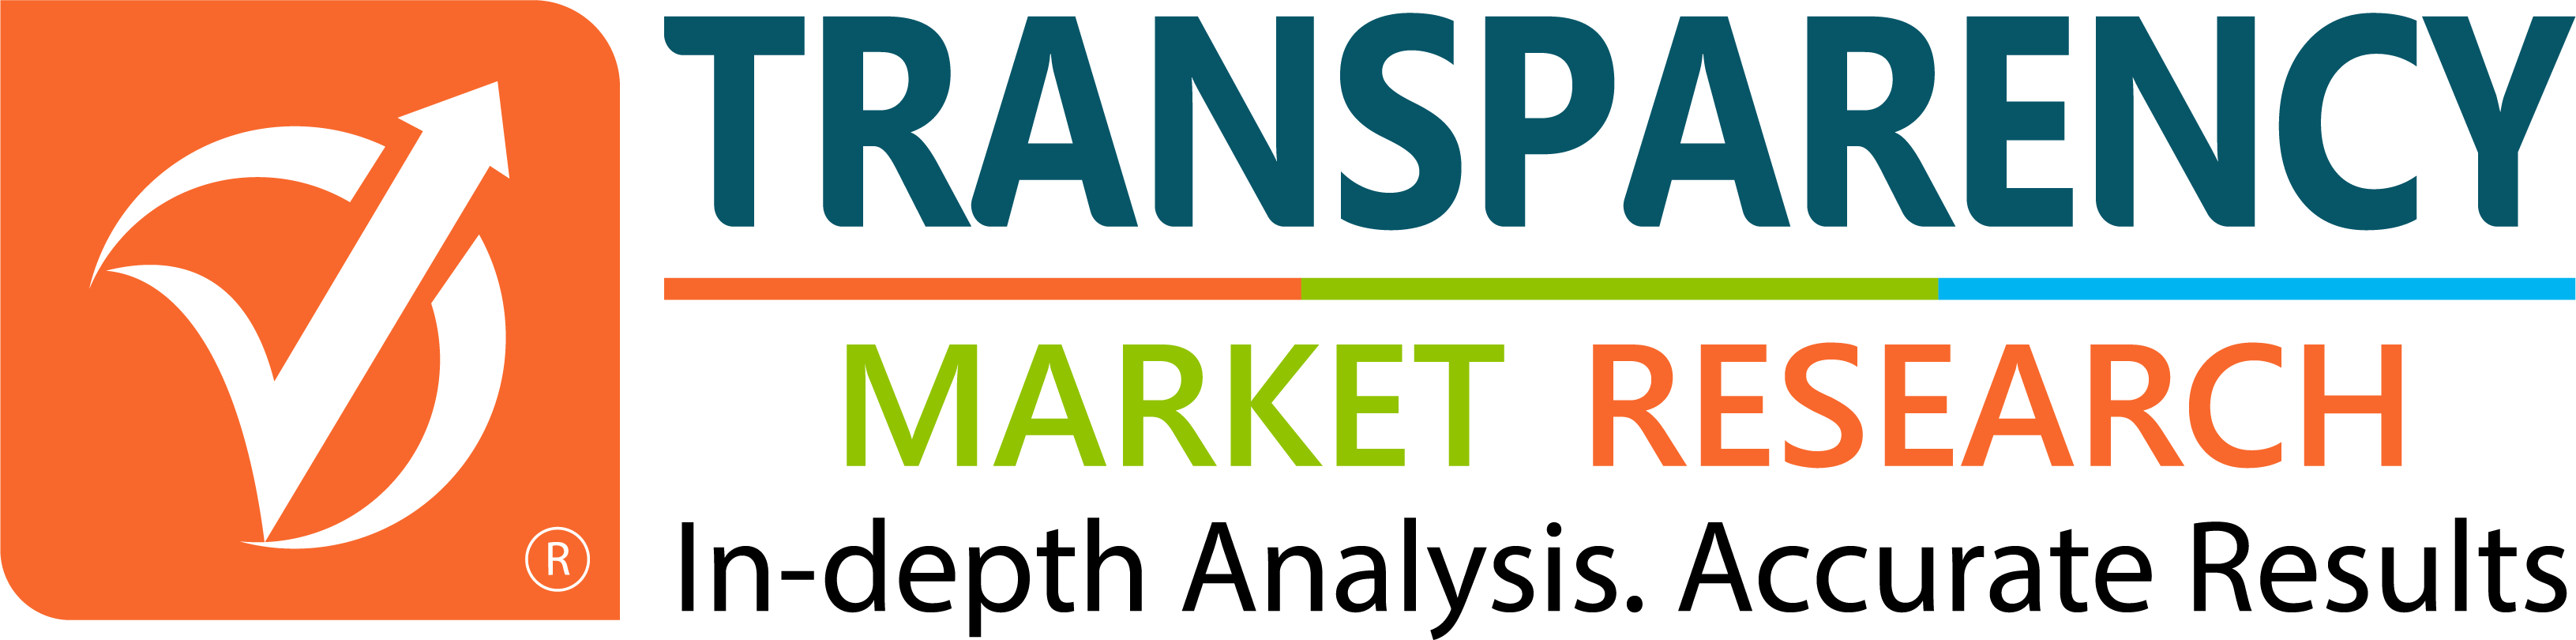 Antimicrobial Susceptibility Test Market to Exceed US$ 4,224.92 Million by 2027 | Transparency Market Research